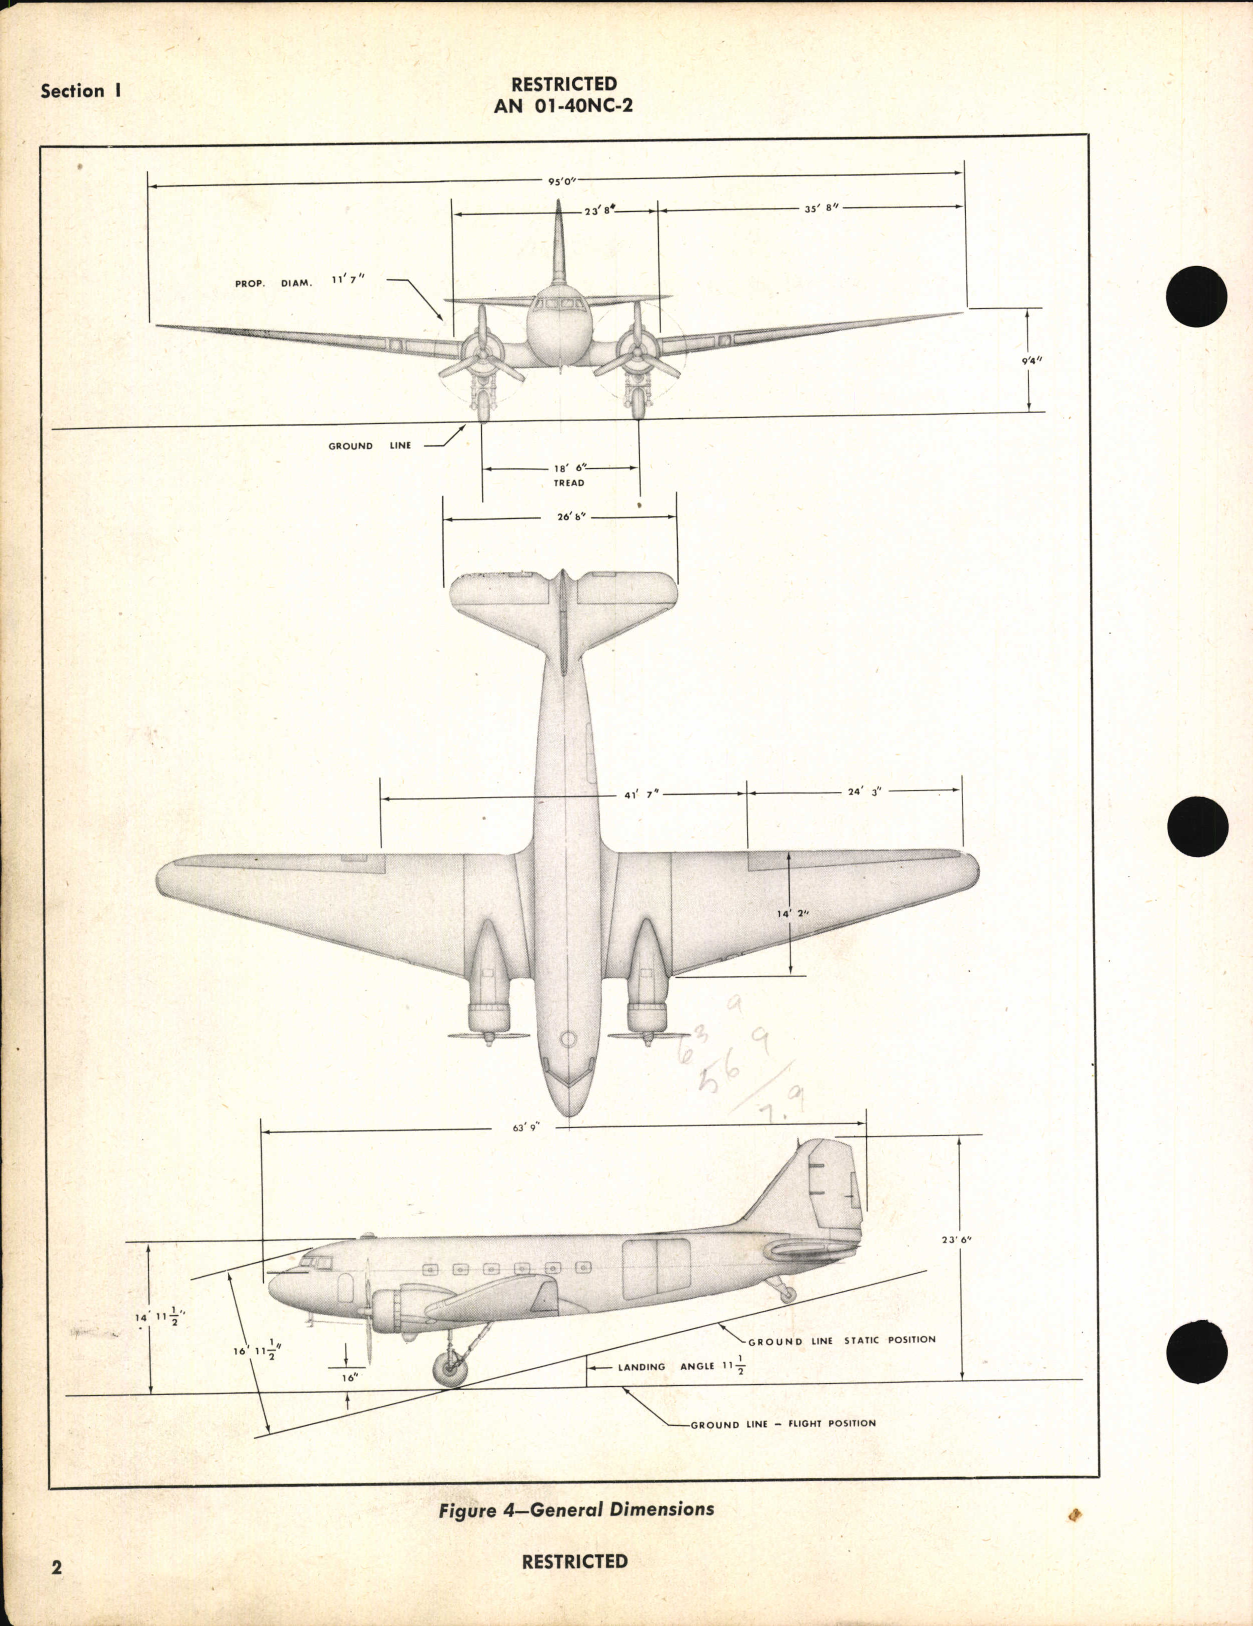 Sample page 8 from AirCorps Library document: Erection and Maintenance Instructions for C-47, C-47A, R4D-1, and R4D-5